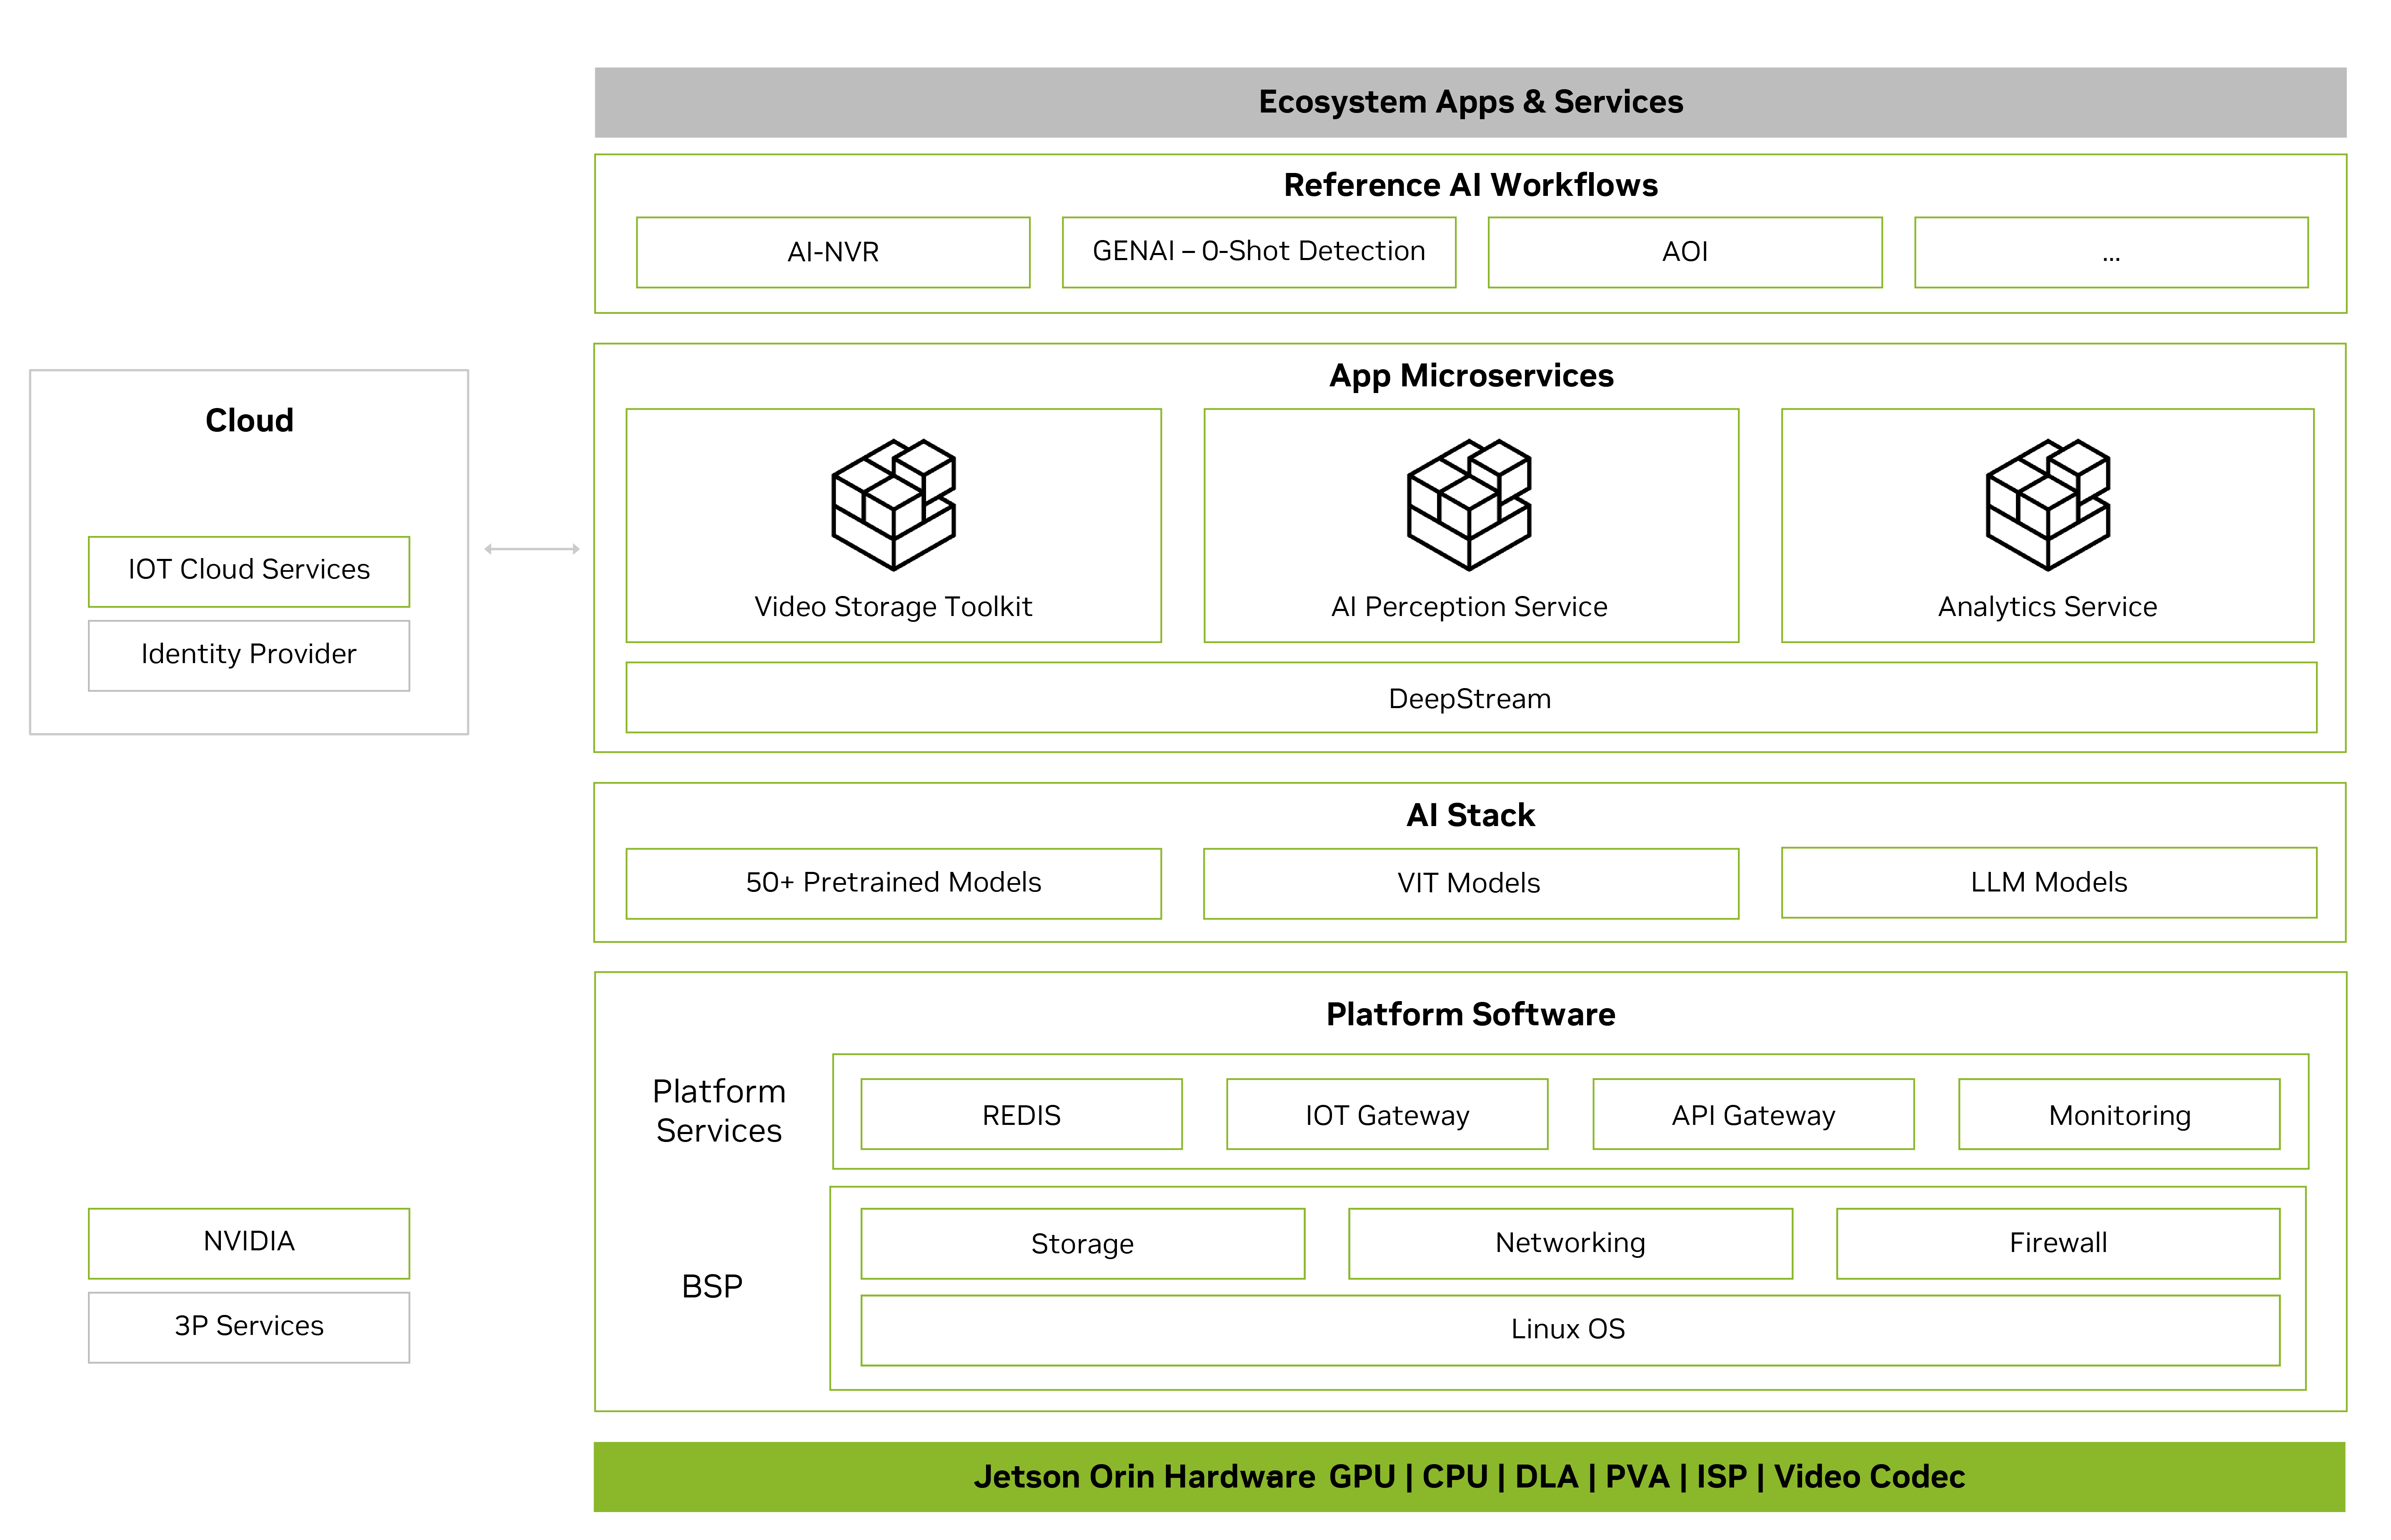 Graphic showing the complete software stack from the reference AI workflow, application microservice, platform, and BSP services to cloud services. 